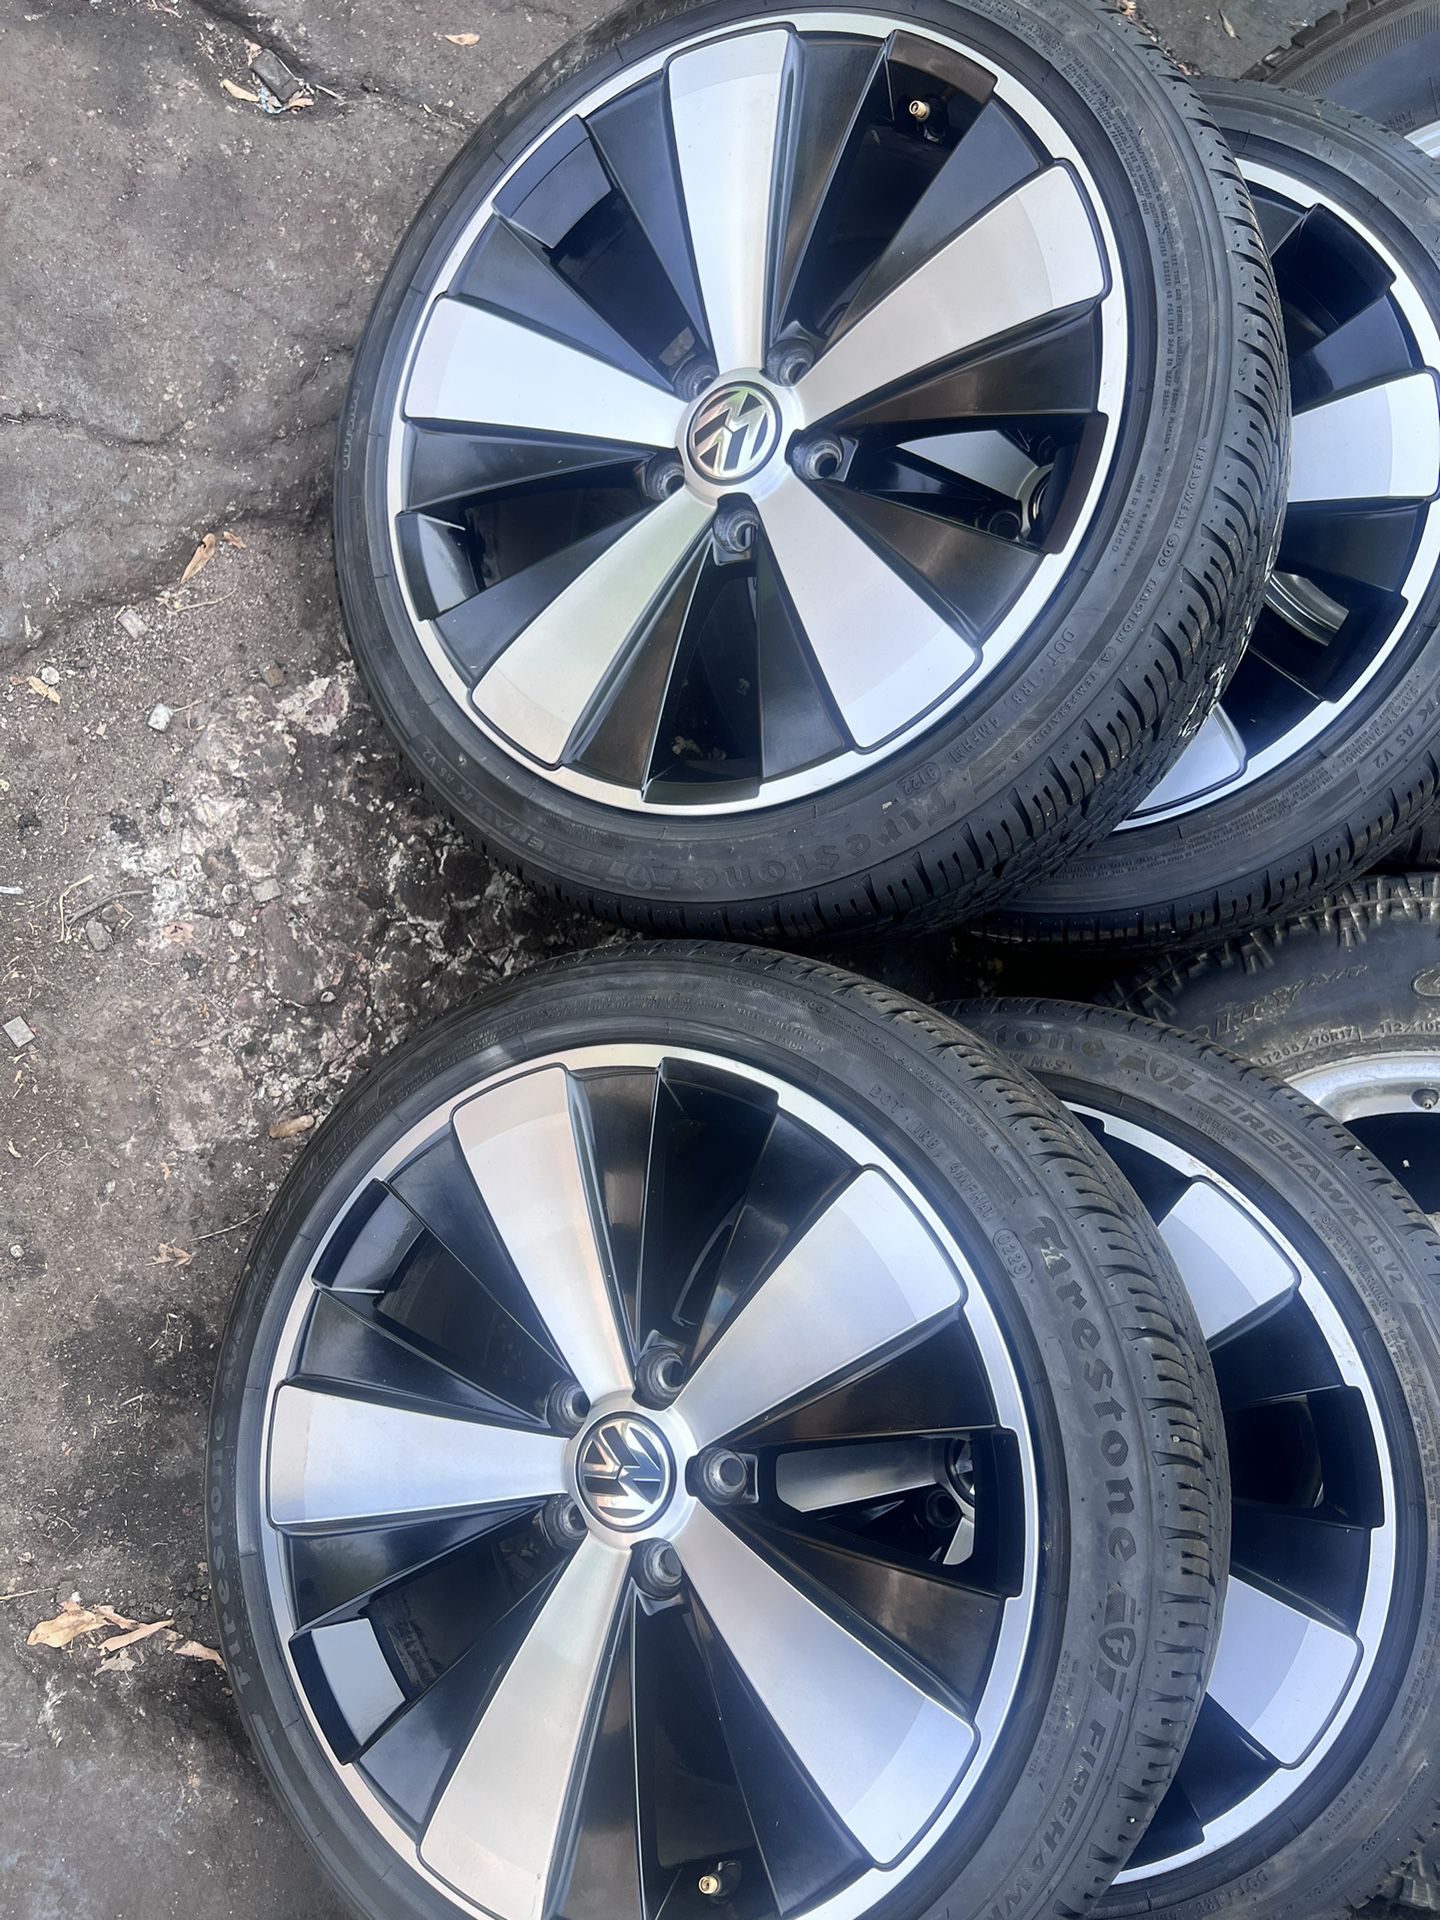 I8 Inch Volkswagen Rims With New Tires 5/112 Lug Pattern Asking 750$ Everything Good No Scratches Or Bent Rim